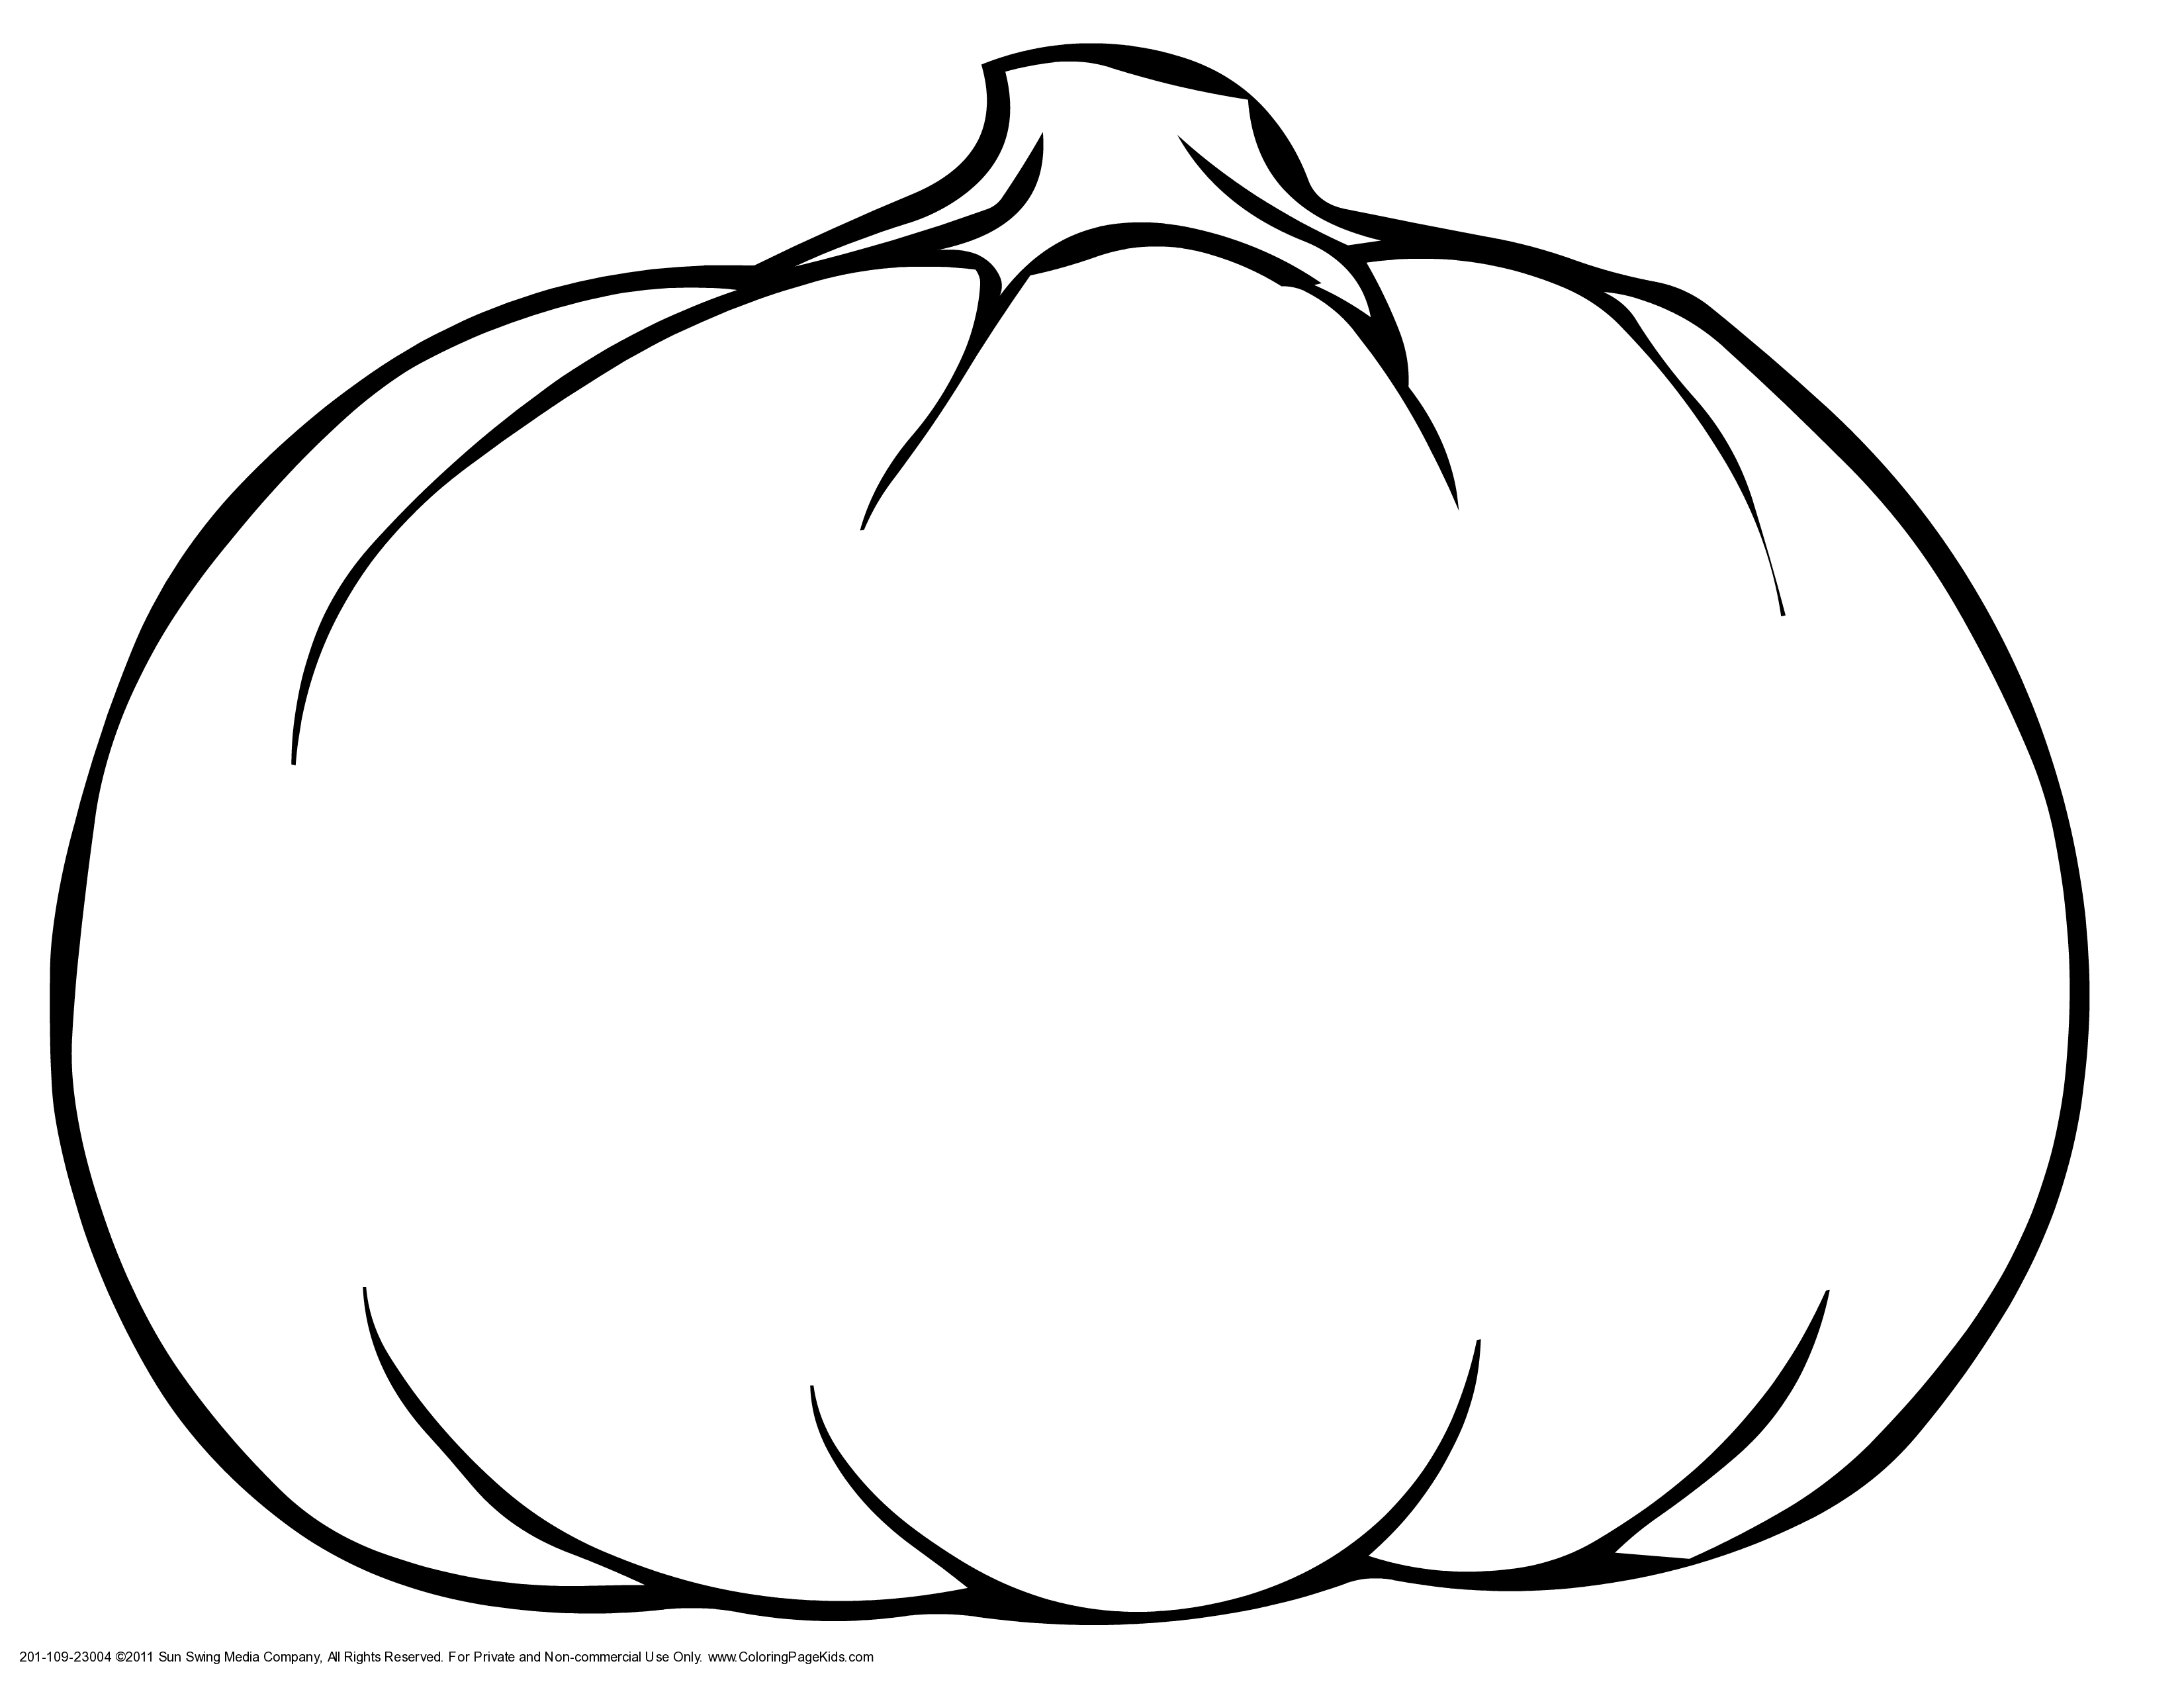 Pumpkin Patch Coloring Page   Clipart Panda   Free Clipart Images